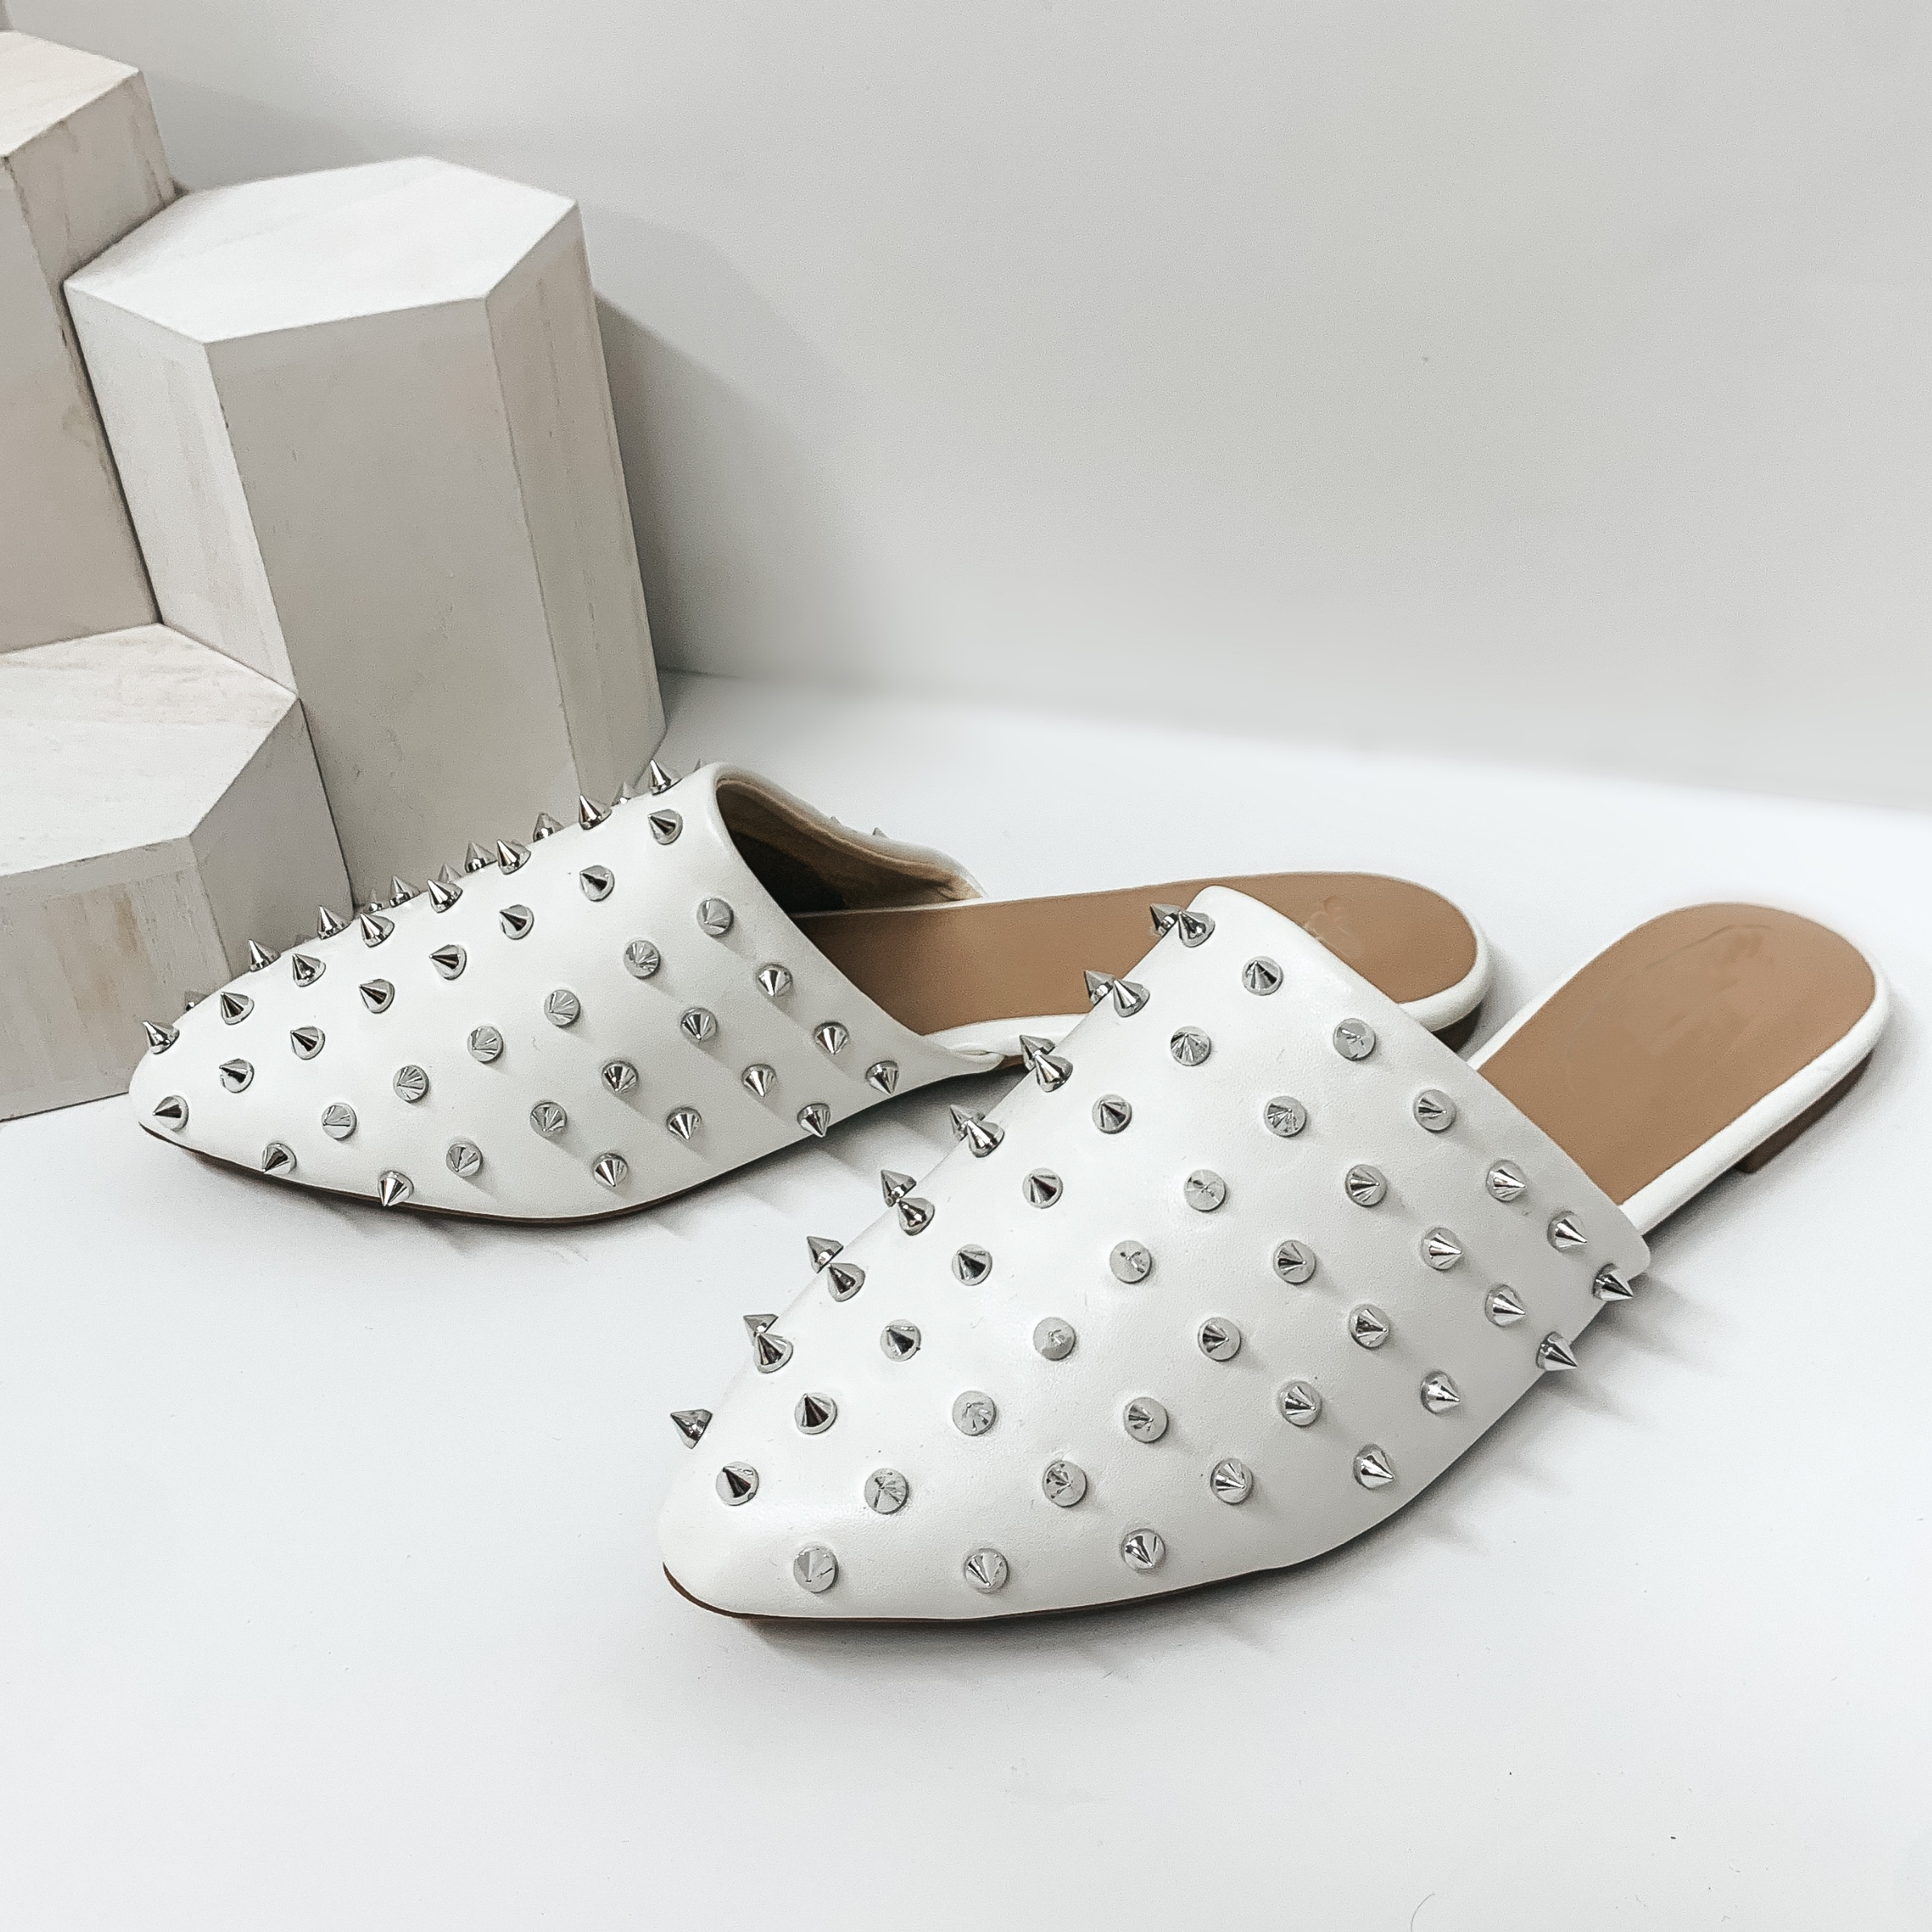 Uptown Girl Silver Spiked Slide On Mules in White. These cute shoes will give you an uptown flare! They include a silver spike embellished upper, a pointed toe, and a 0.25 inch high heel. Pair these shoes with any outfit for a fun look!